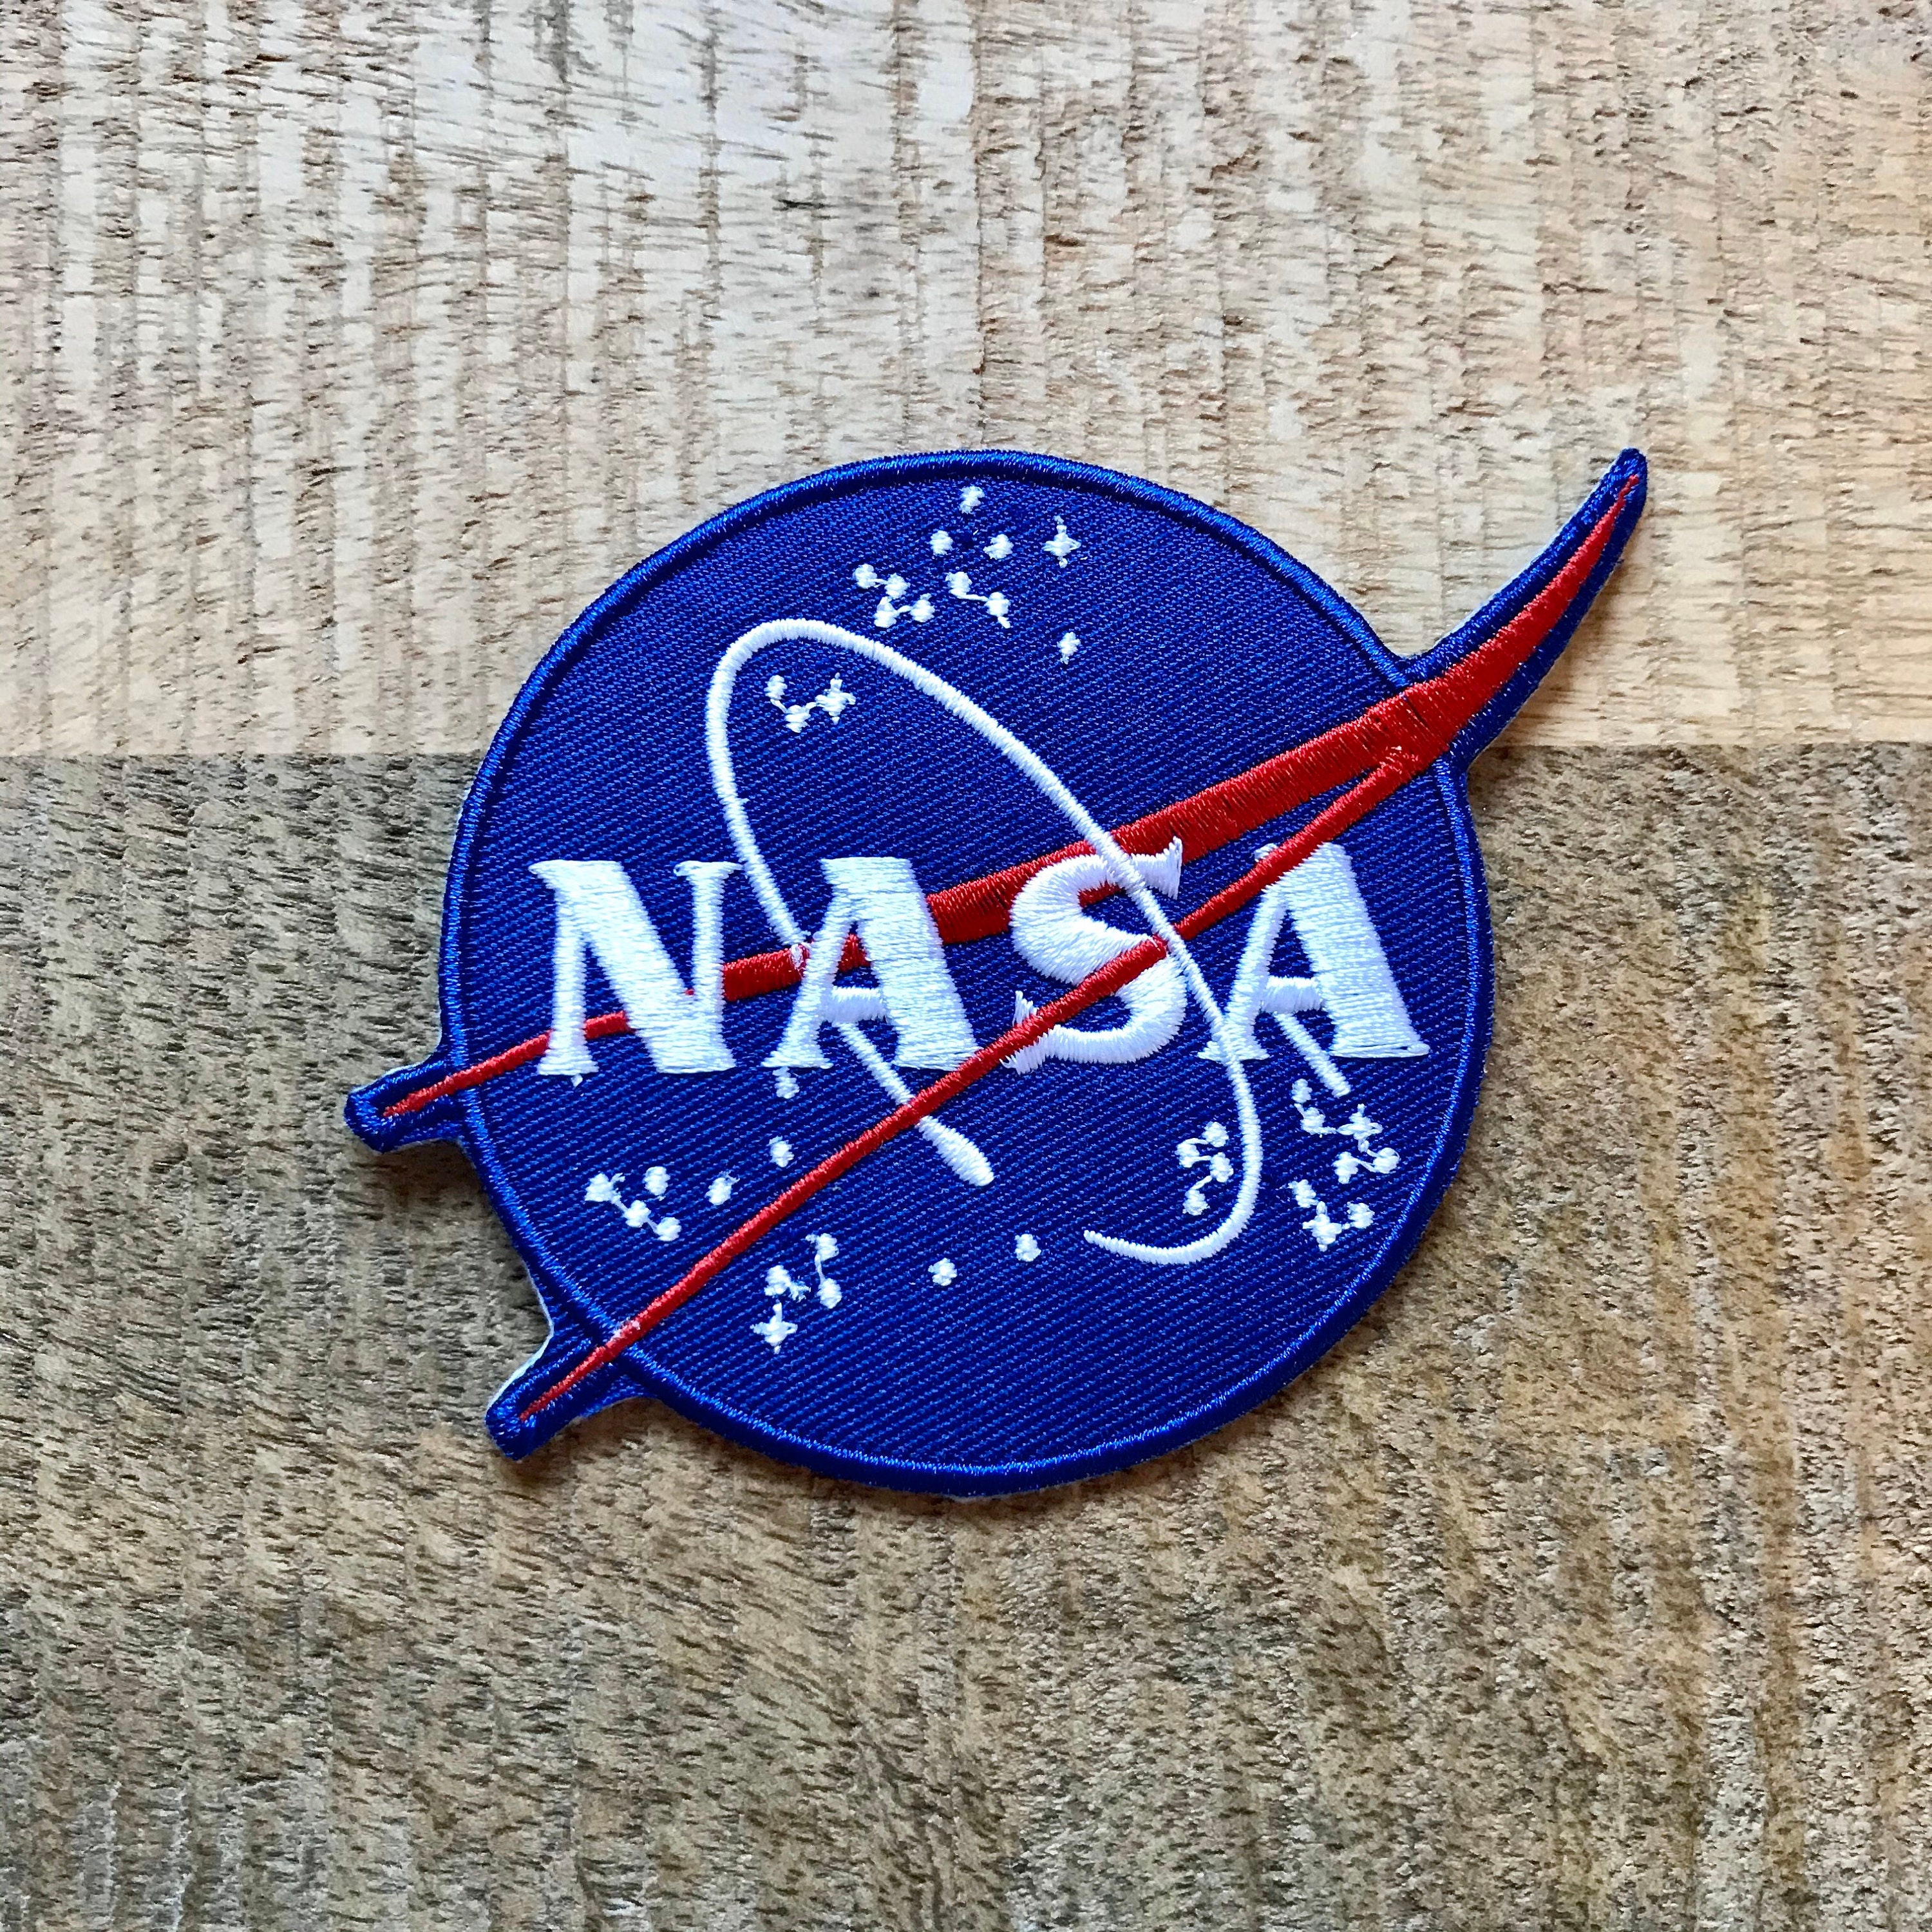 NASA Iron On Patch Embroidered Astronaut Fancy Dress T Shirt Black Sew On Badge 